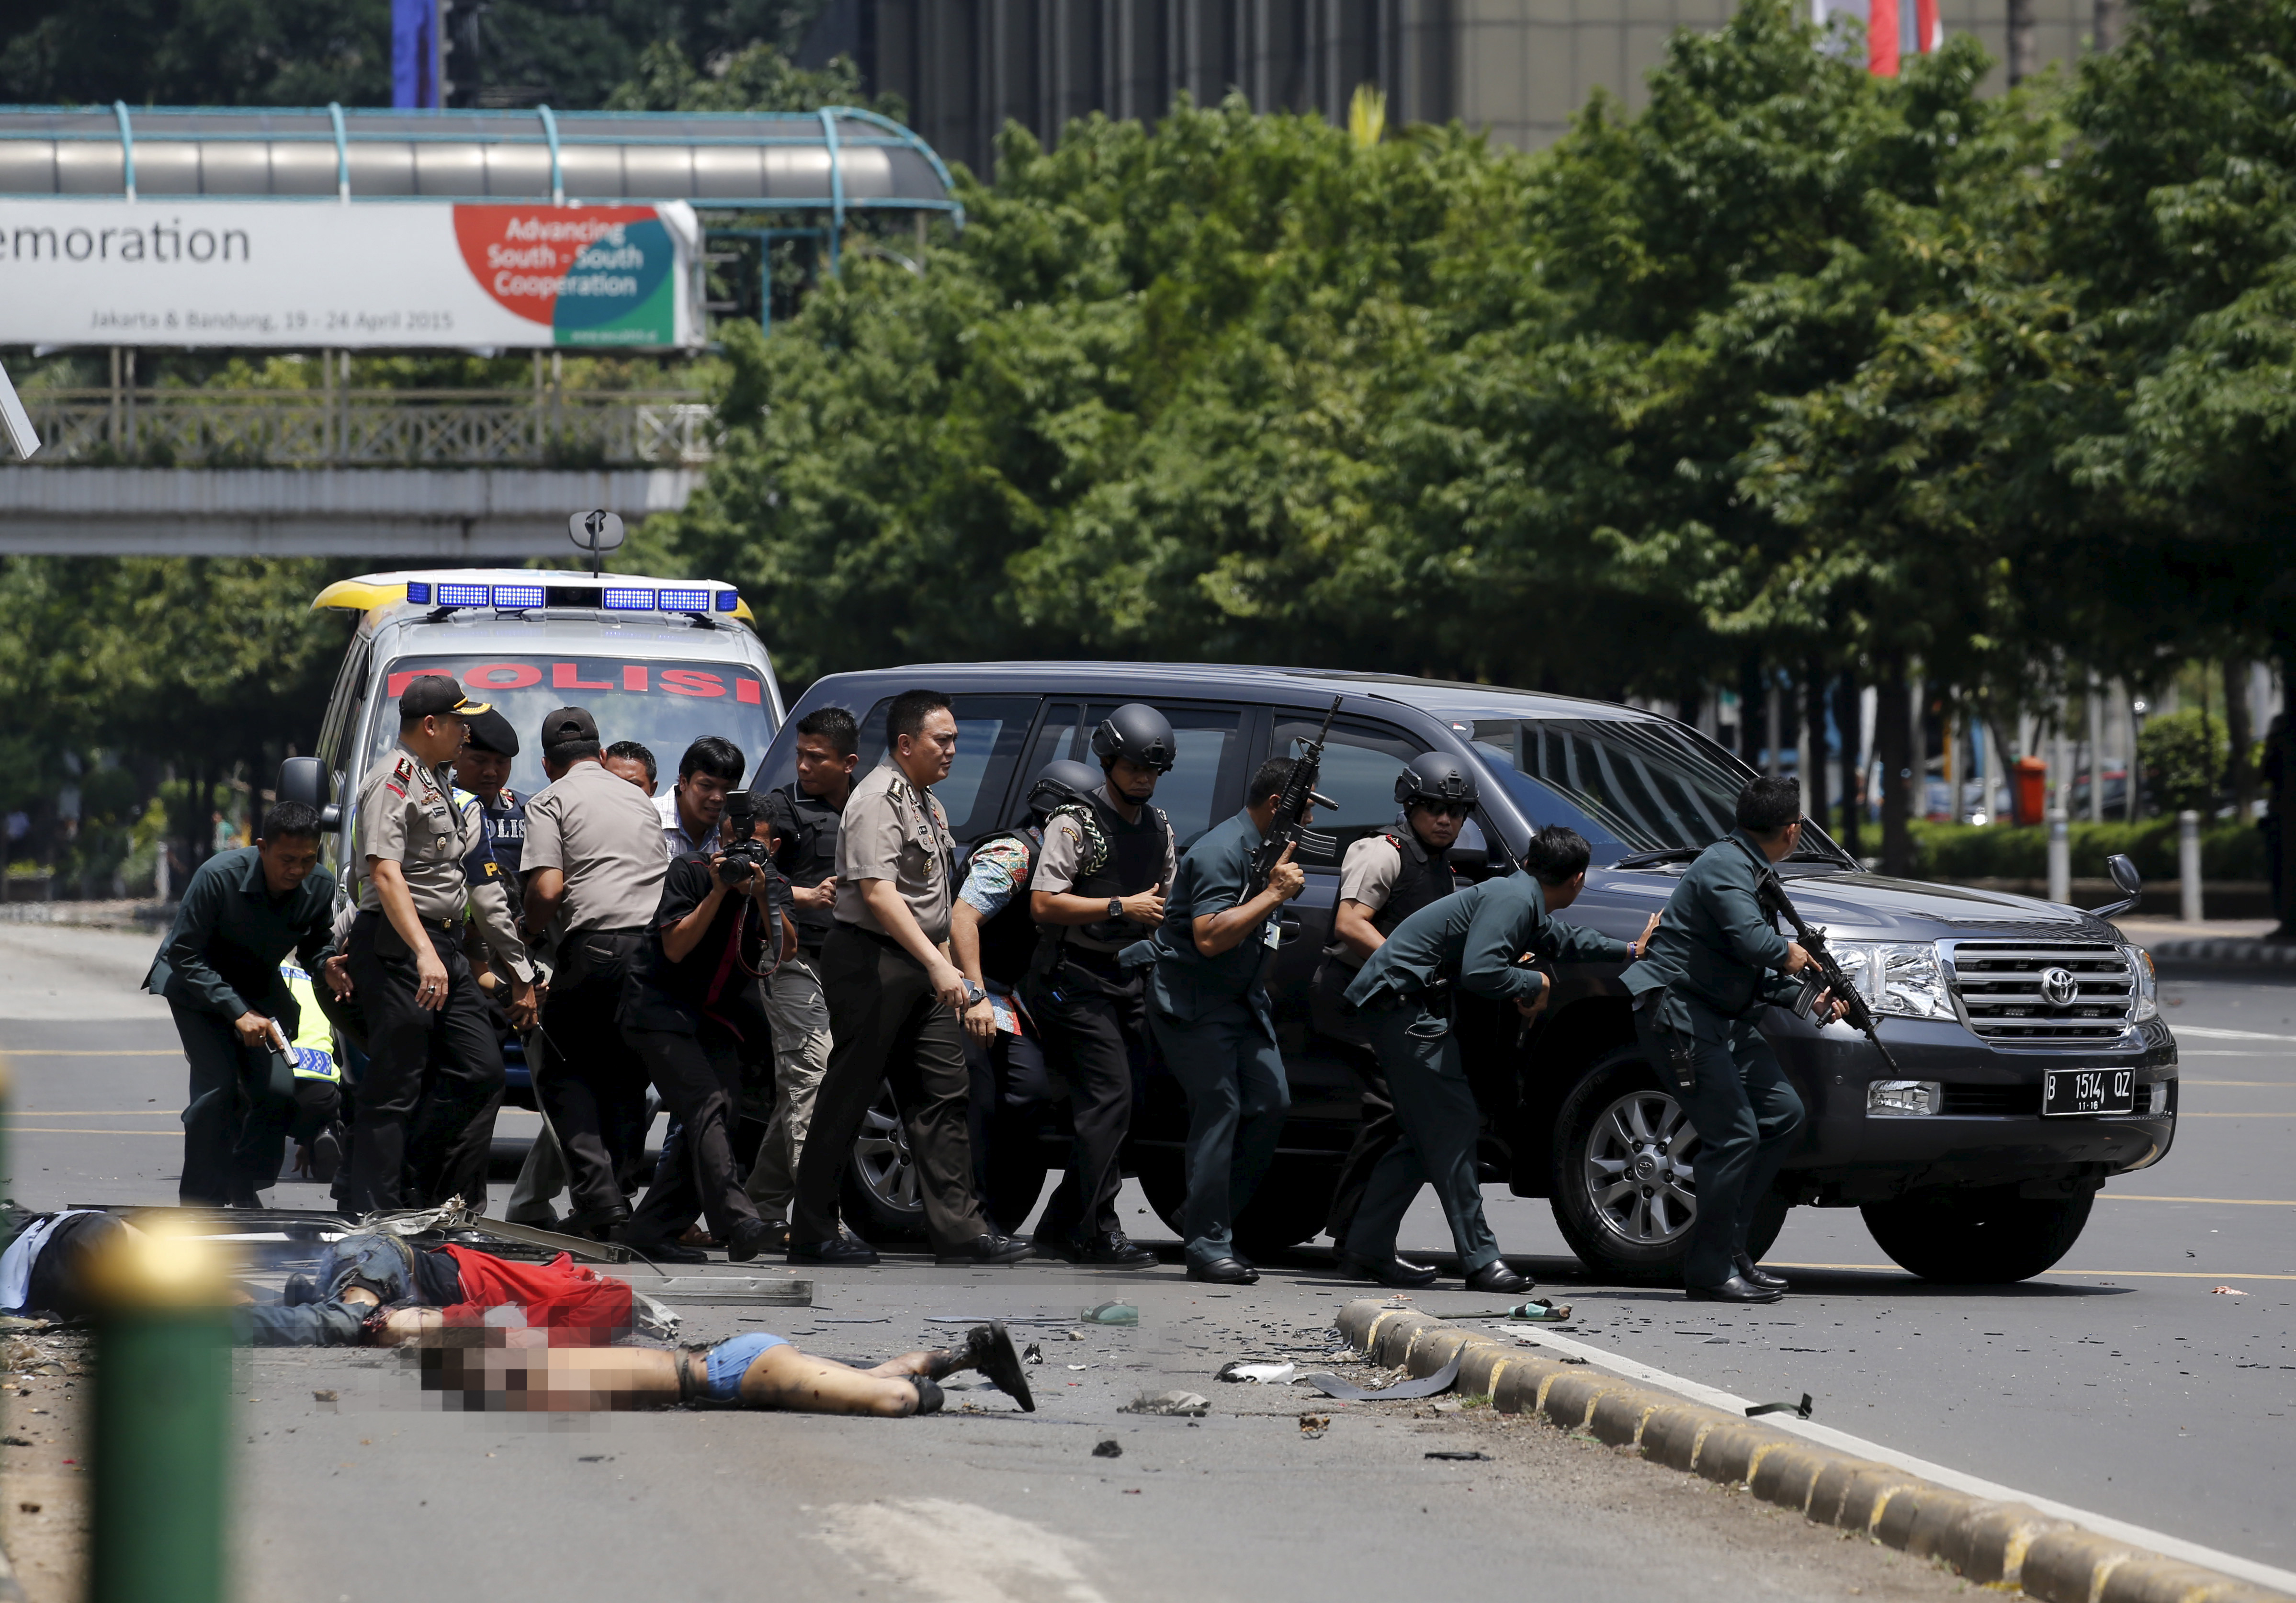 3 arrested in deadly blasts in Jakarta, Indonesia - CBS News